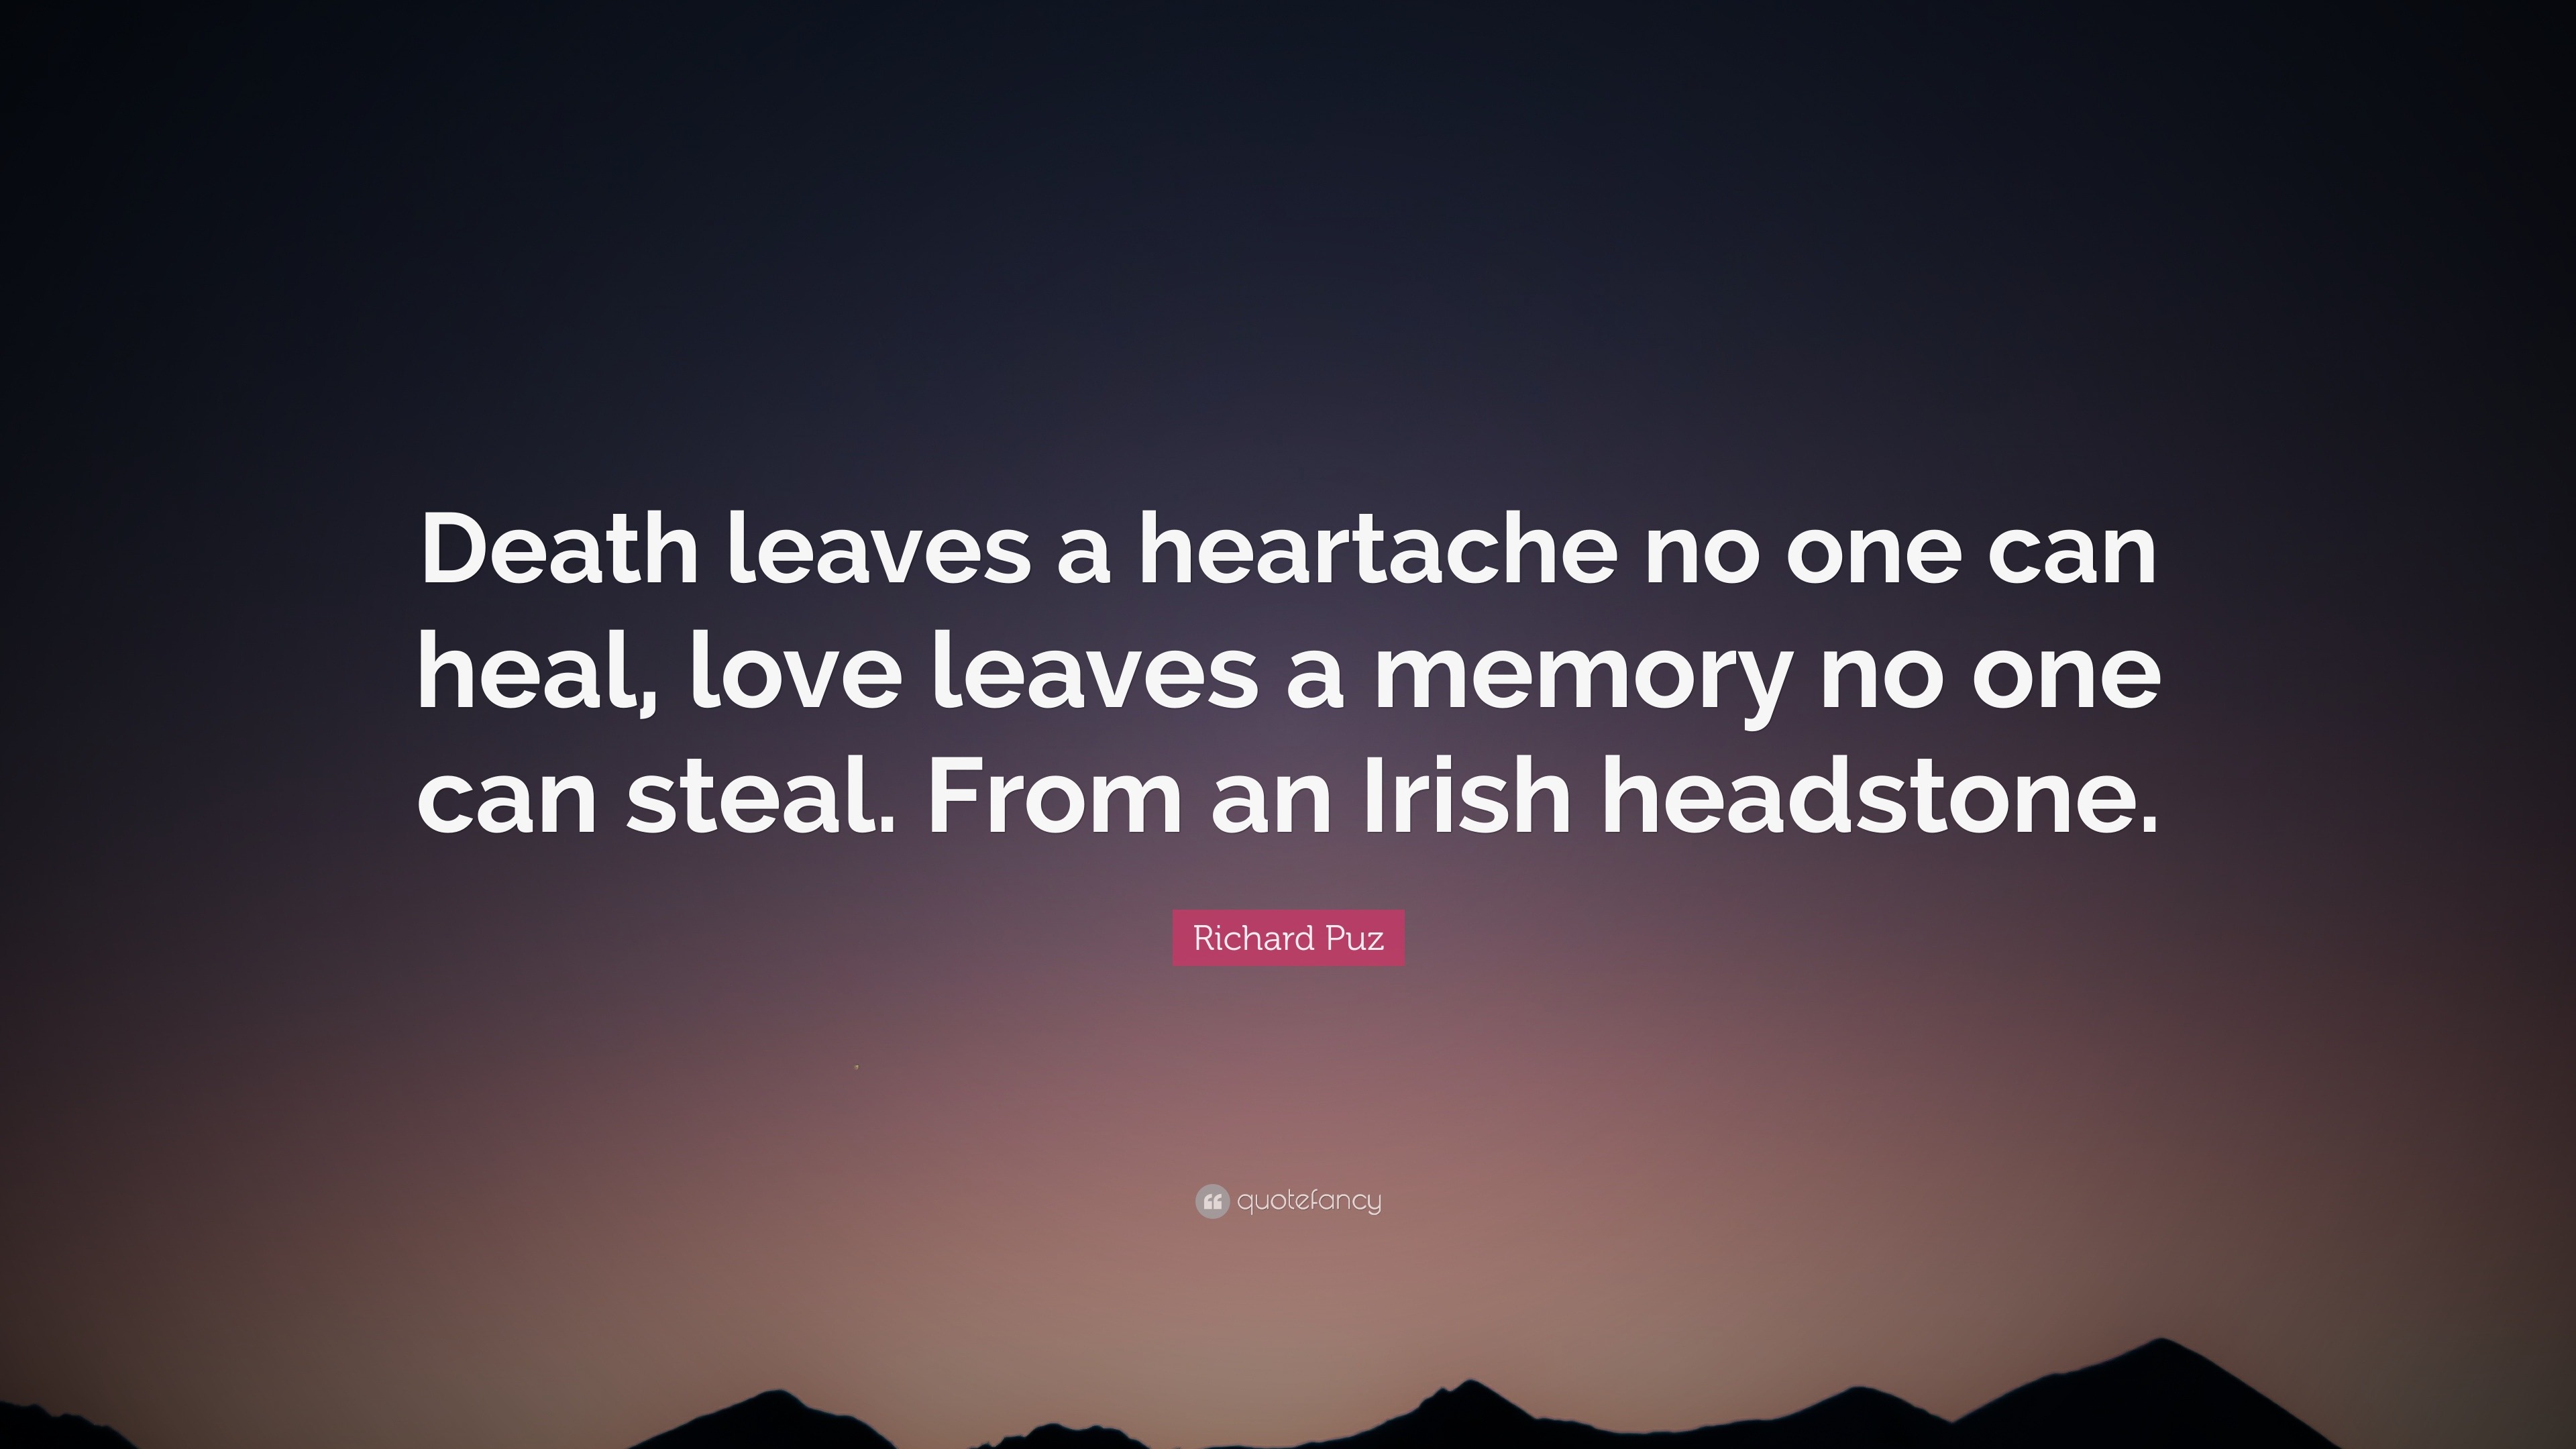 Richard Puz Quote “Death leaves a heartache no one can heal love leaves